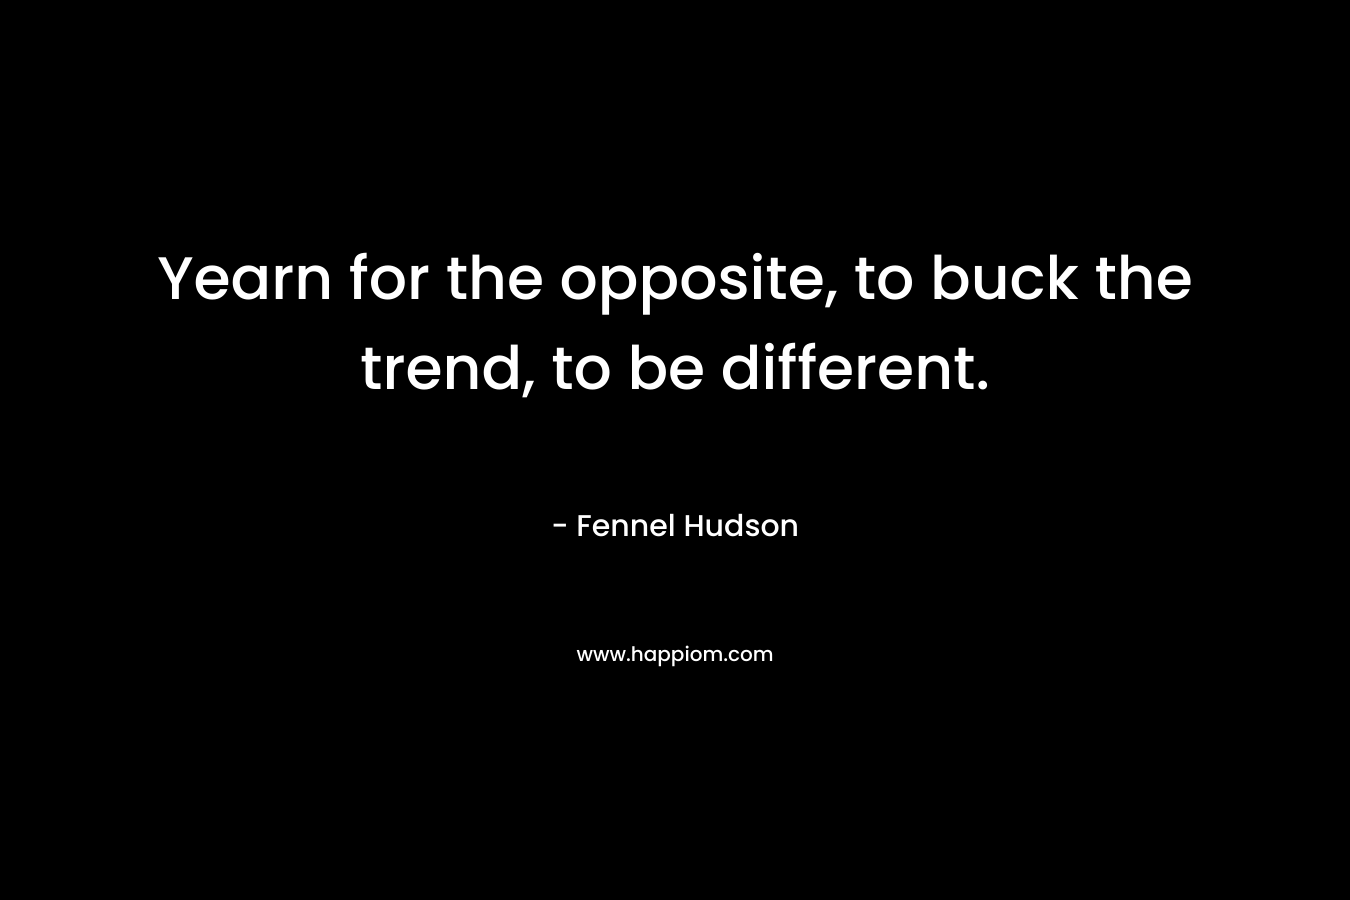 Yearn for the opposite, to buck the trend, to be different. – Fennel Hudson